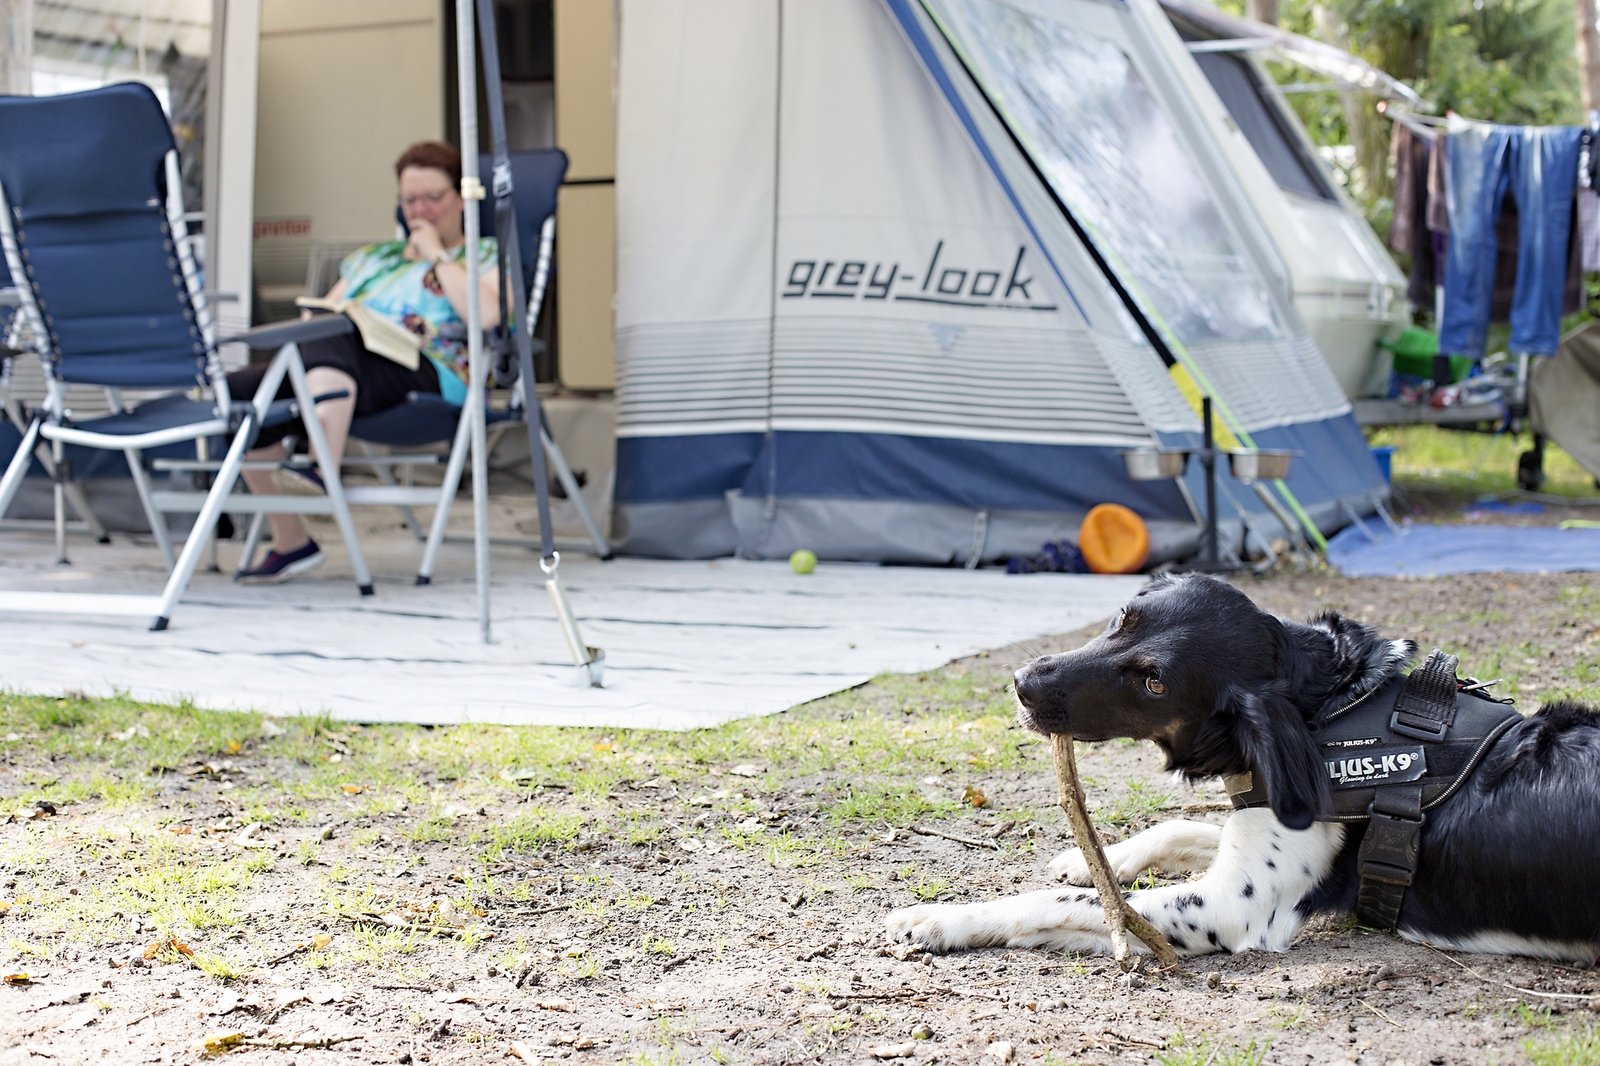 Comfort Camping pitch with pet